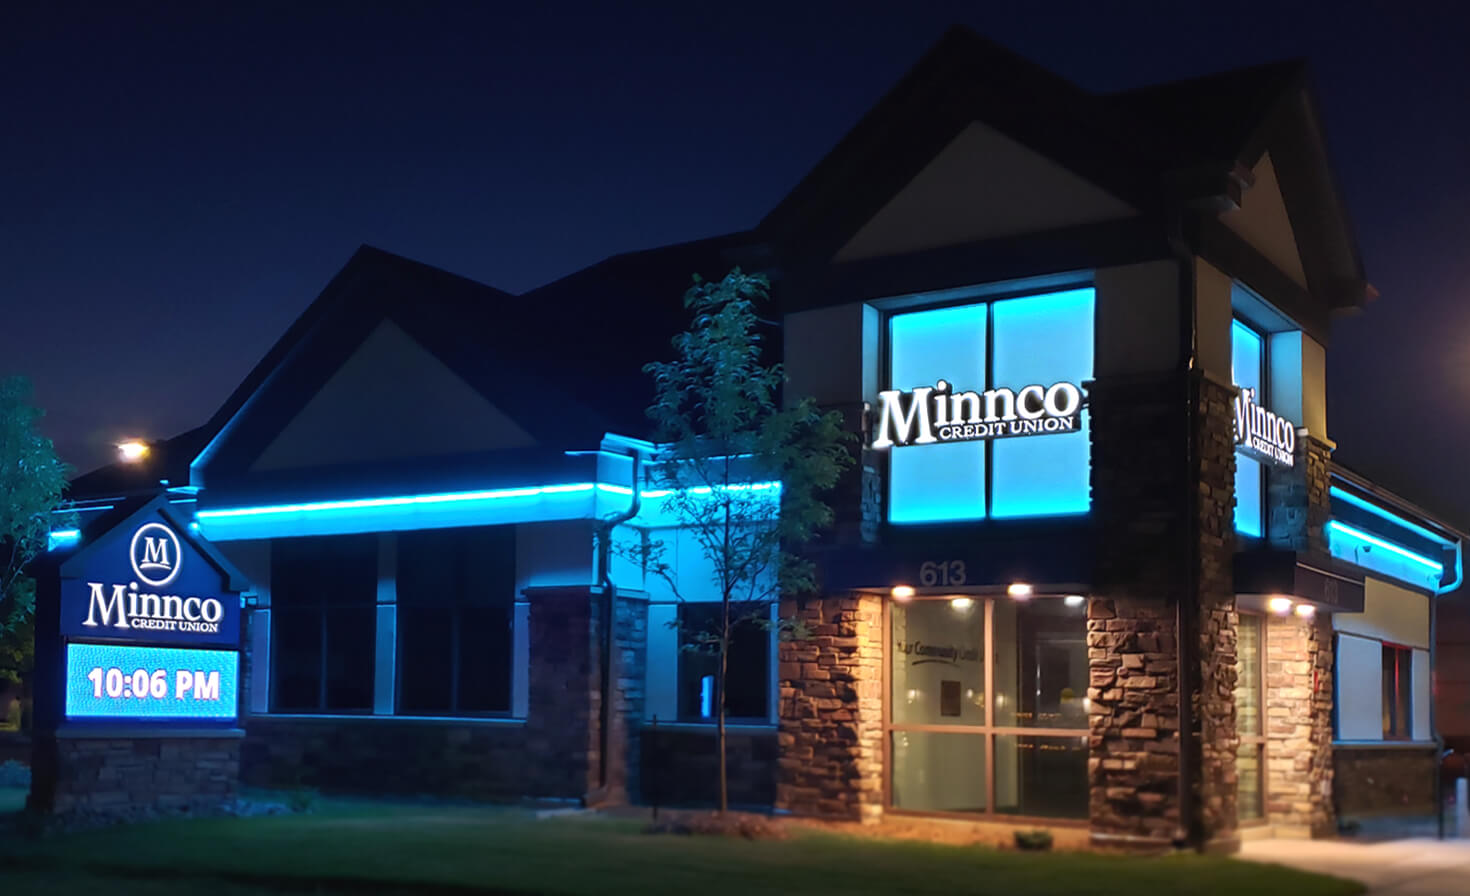 Minnco Credit Union Big Lake MN Exterior Signage at Night and LED accent lighting